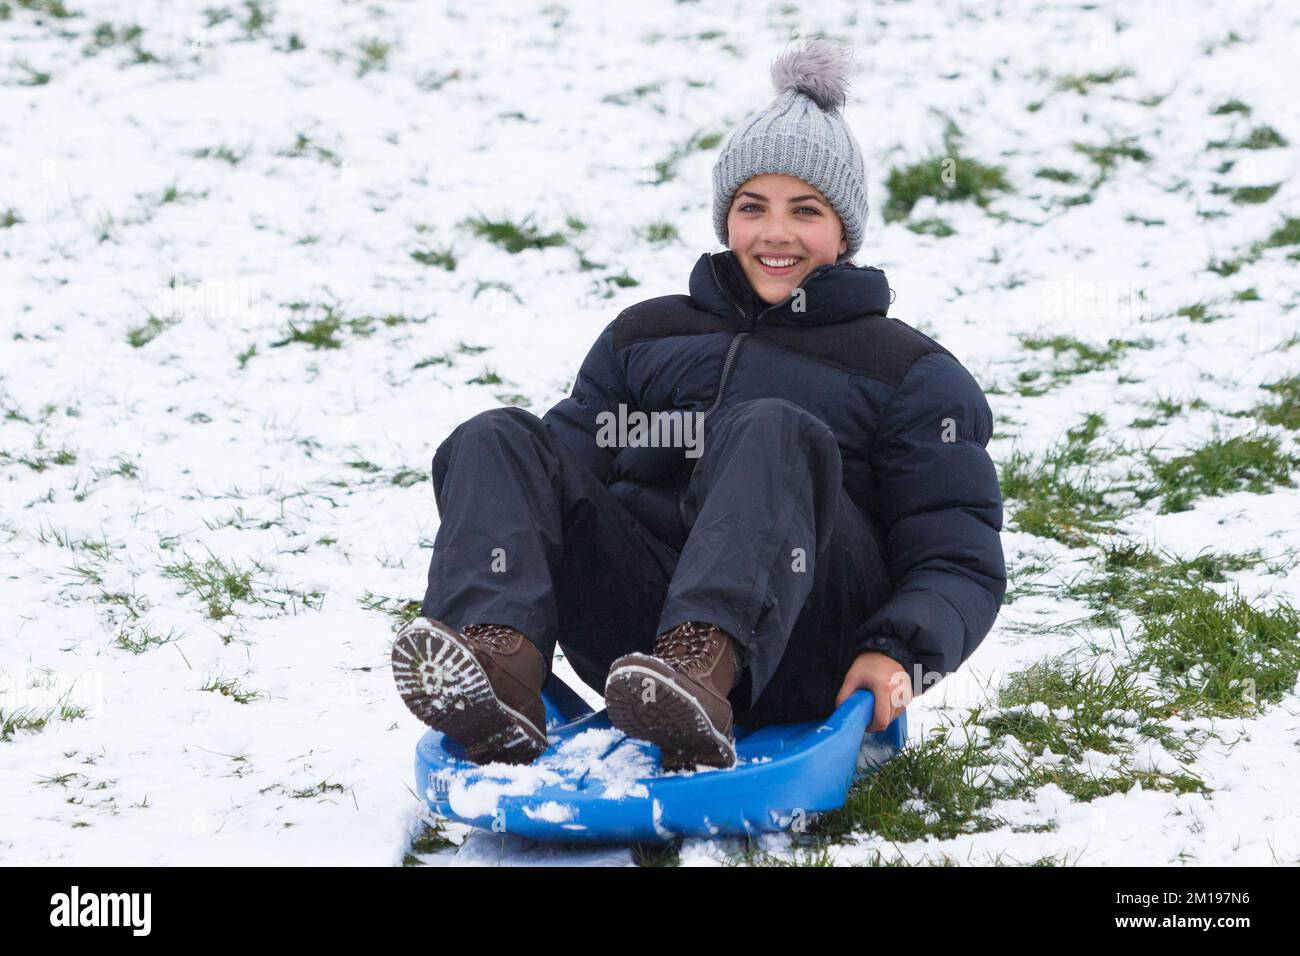 Chippenham, Wiltshire, UK, 11th Dec, 2022. As Chippenham residents wake up to their first snow of the year, a woman is pictured in a local park in Chippenham as she speeds down a hill on a sledge. Credit: Lynchpics/Alamy Live News. Stock Photo